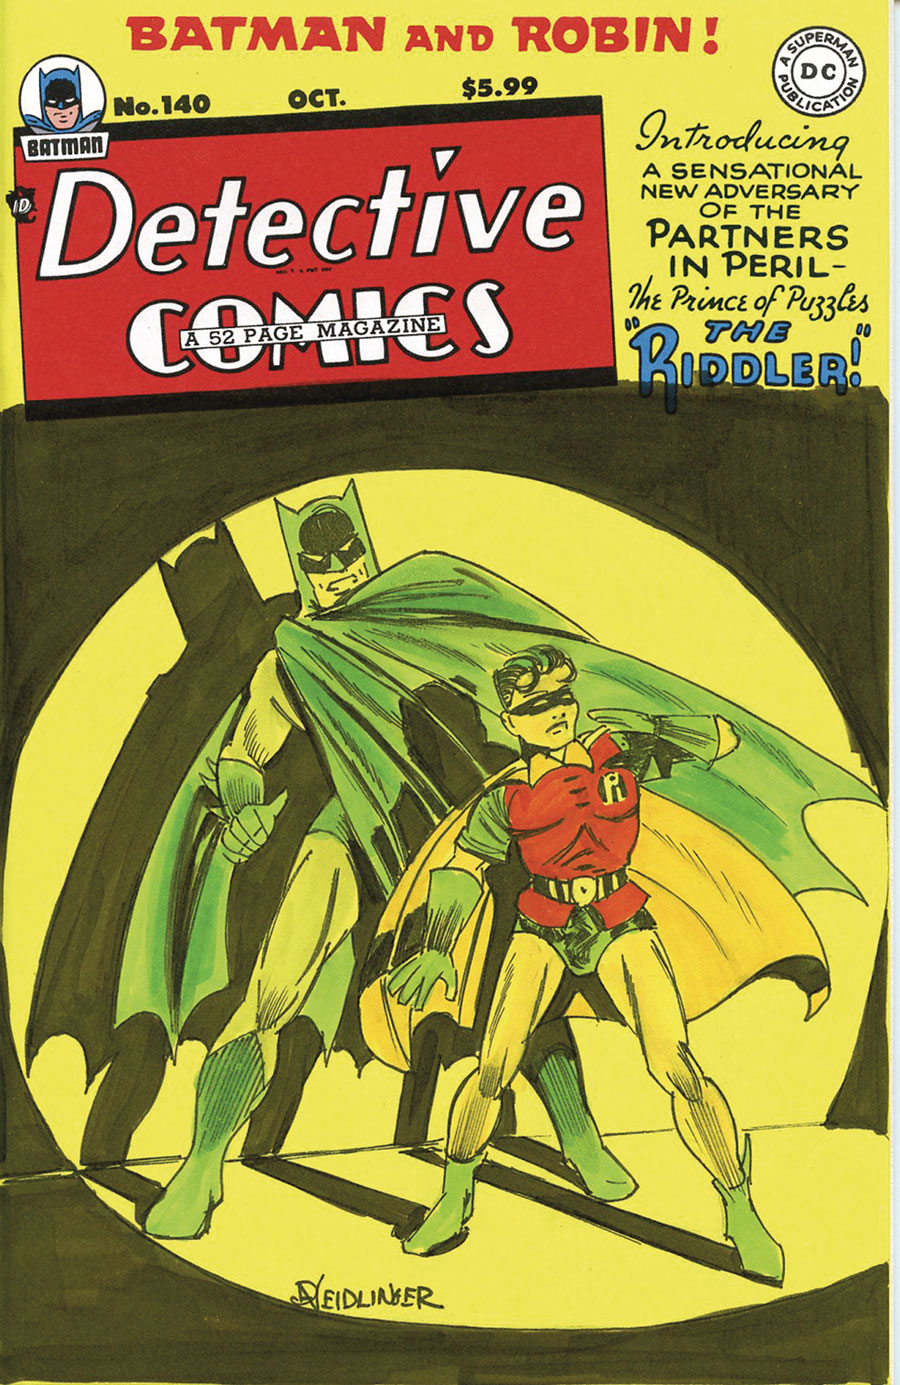 Detective Comics #140 Facsimile Edition Cover D DF Blank Cover Art Signed & Remarked By Dan Neidlinger With A Batman 9 Homage Hand-Drawn Sketch